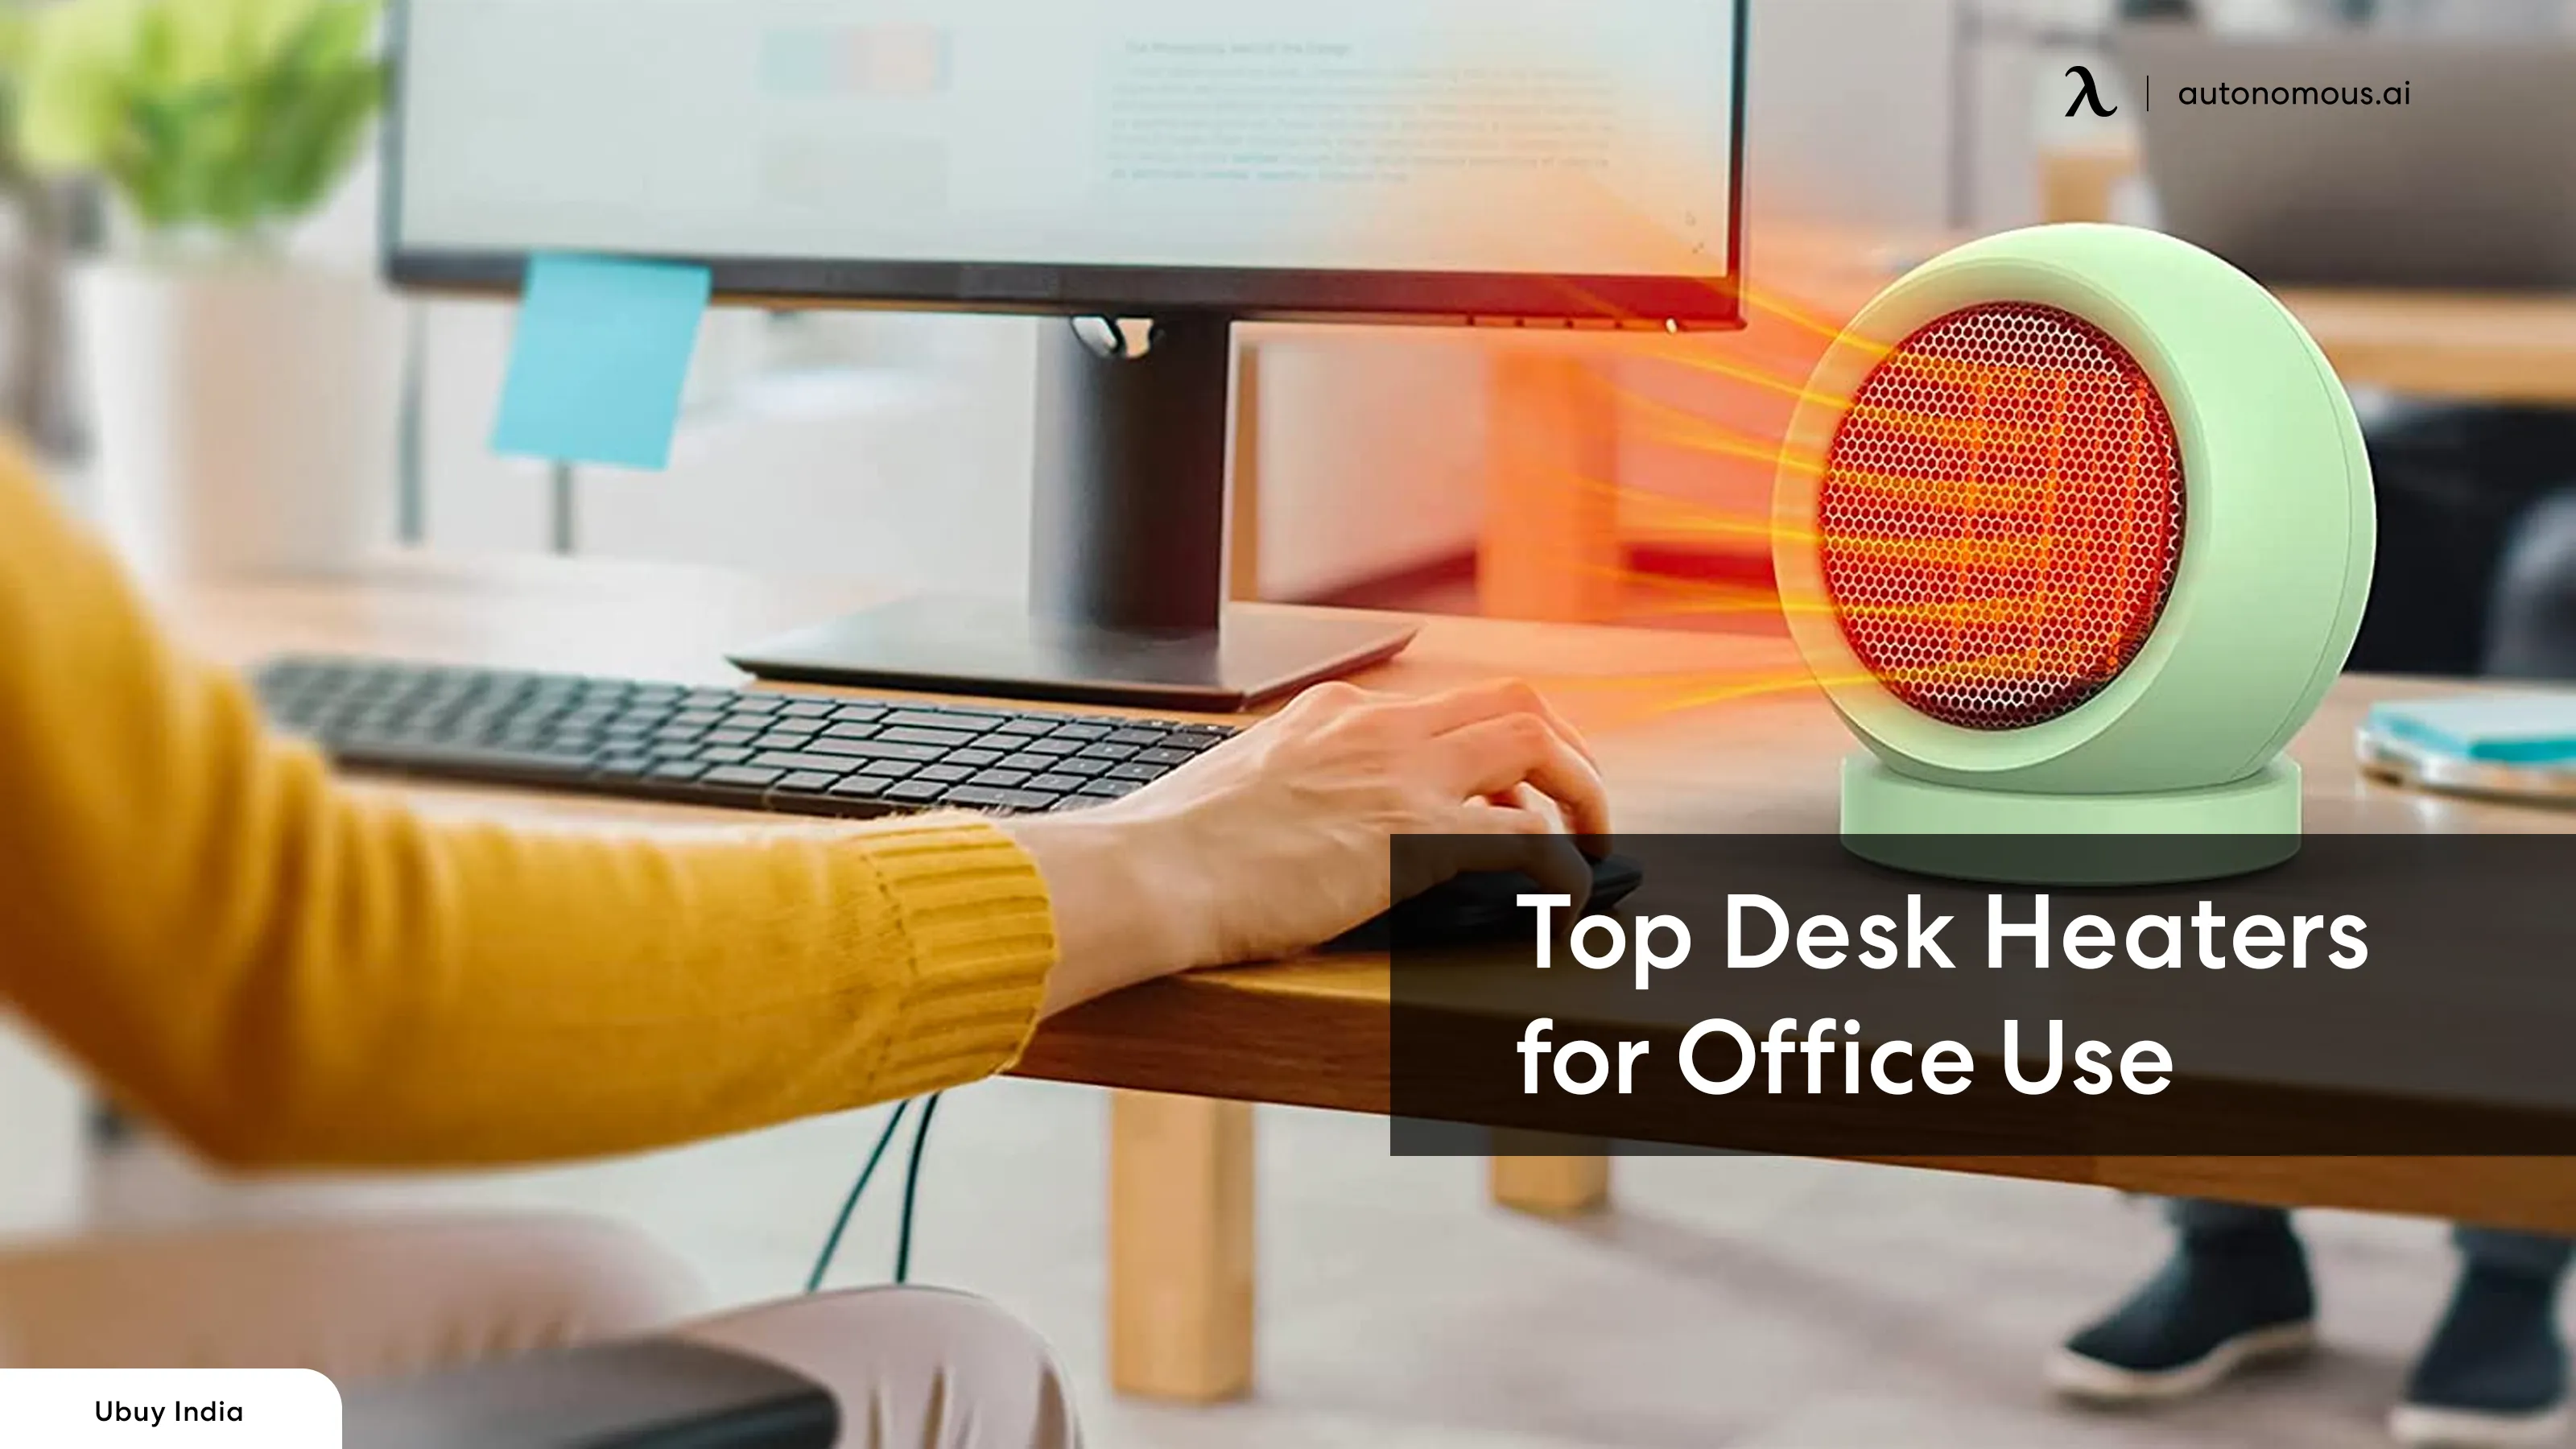 Stay Warm with Office Desk Heater: Top Models Reviewed